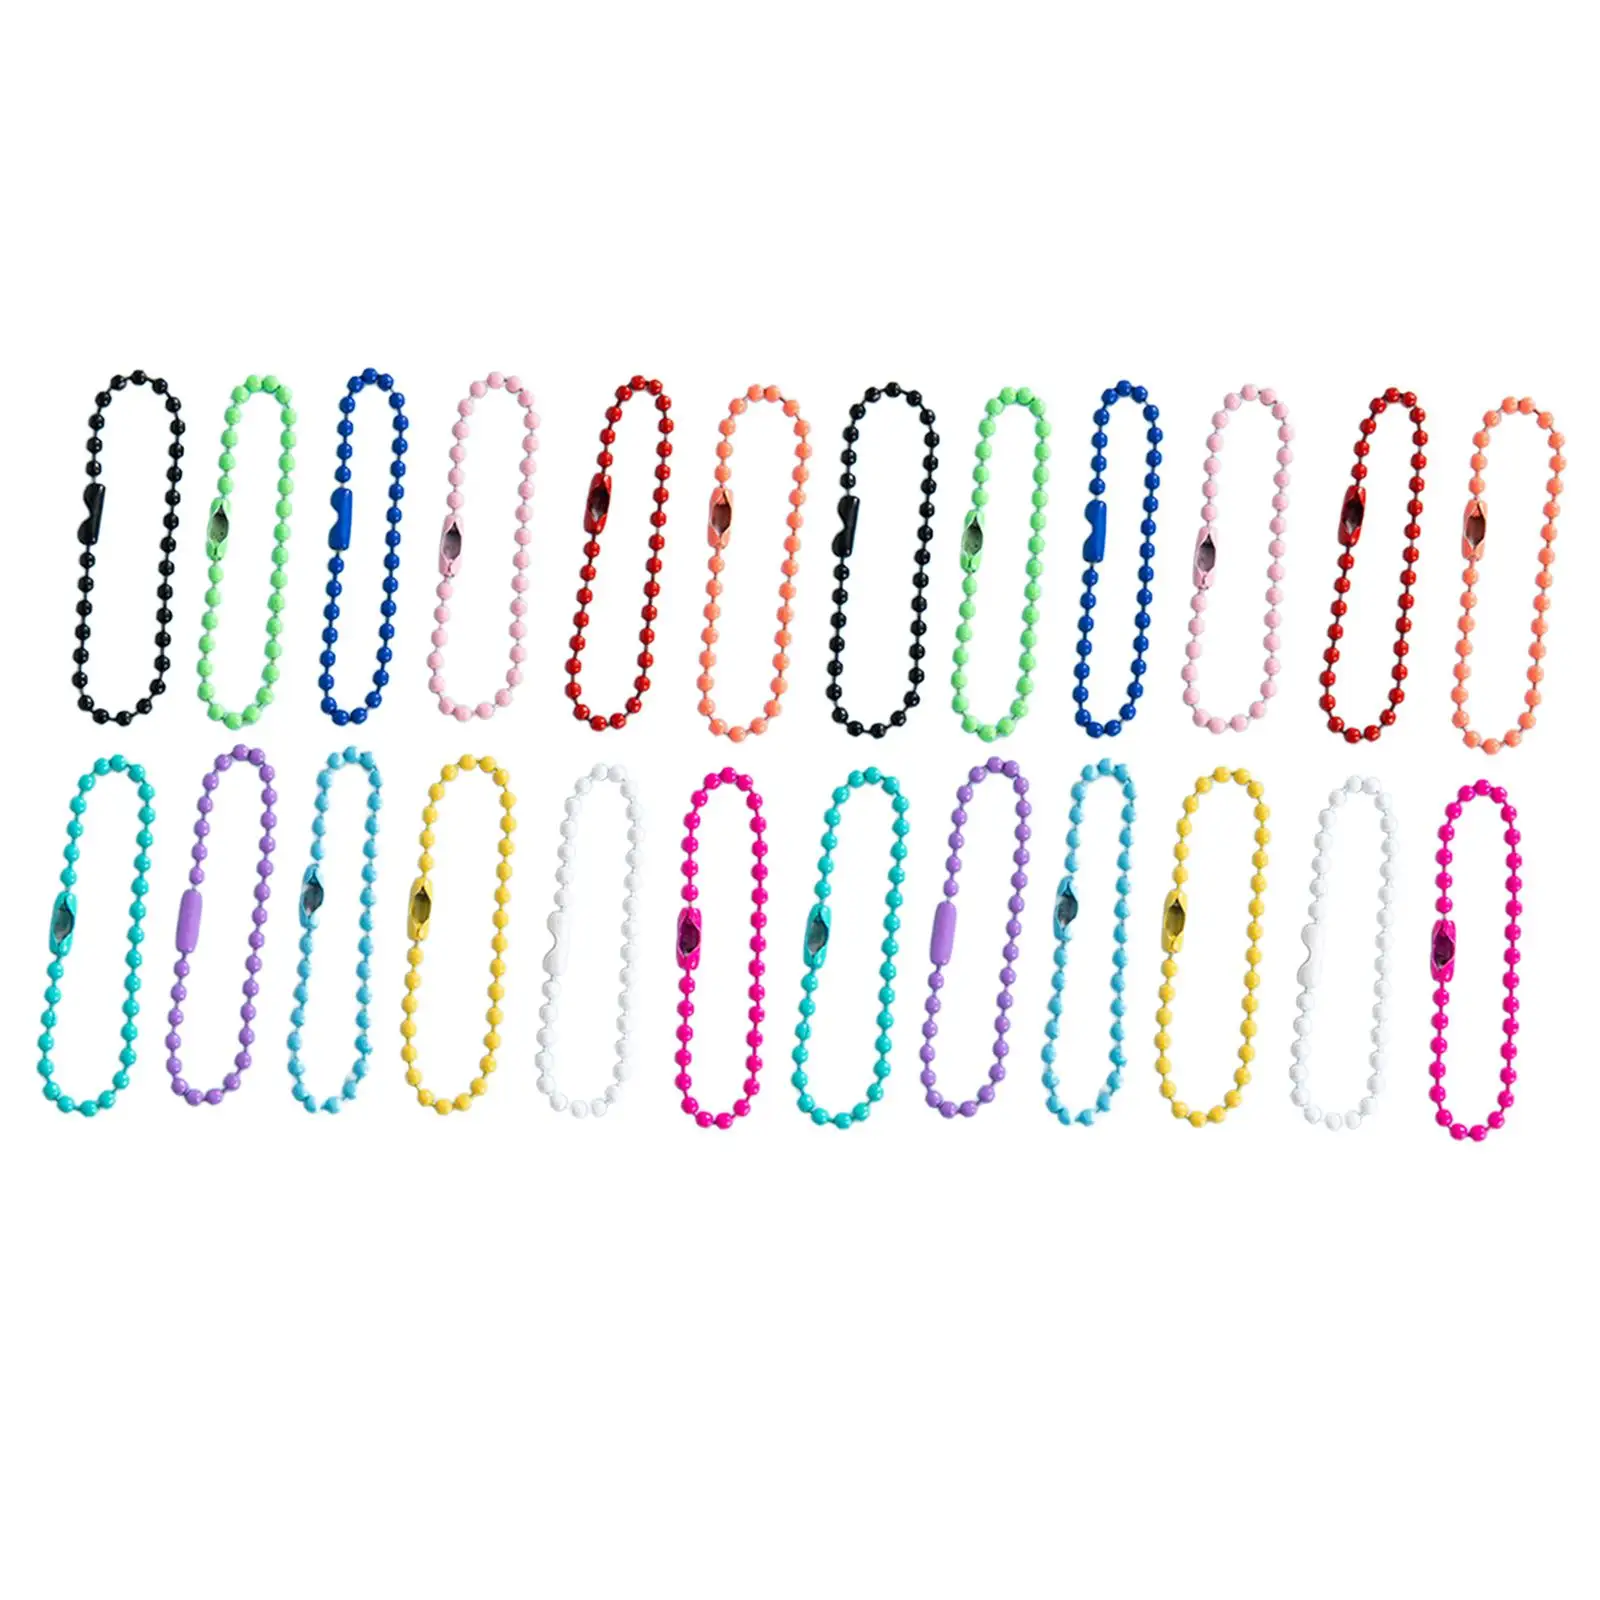 100 * Colorful Ball Bead Chain  10cm for Jewelry Making Accessories